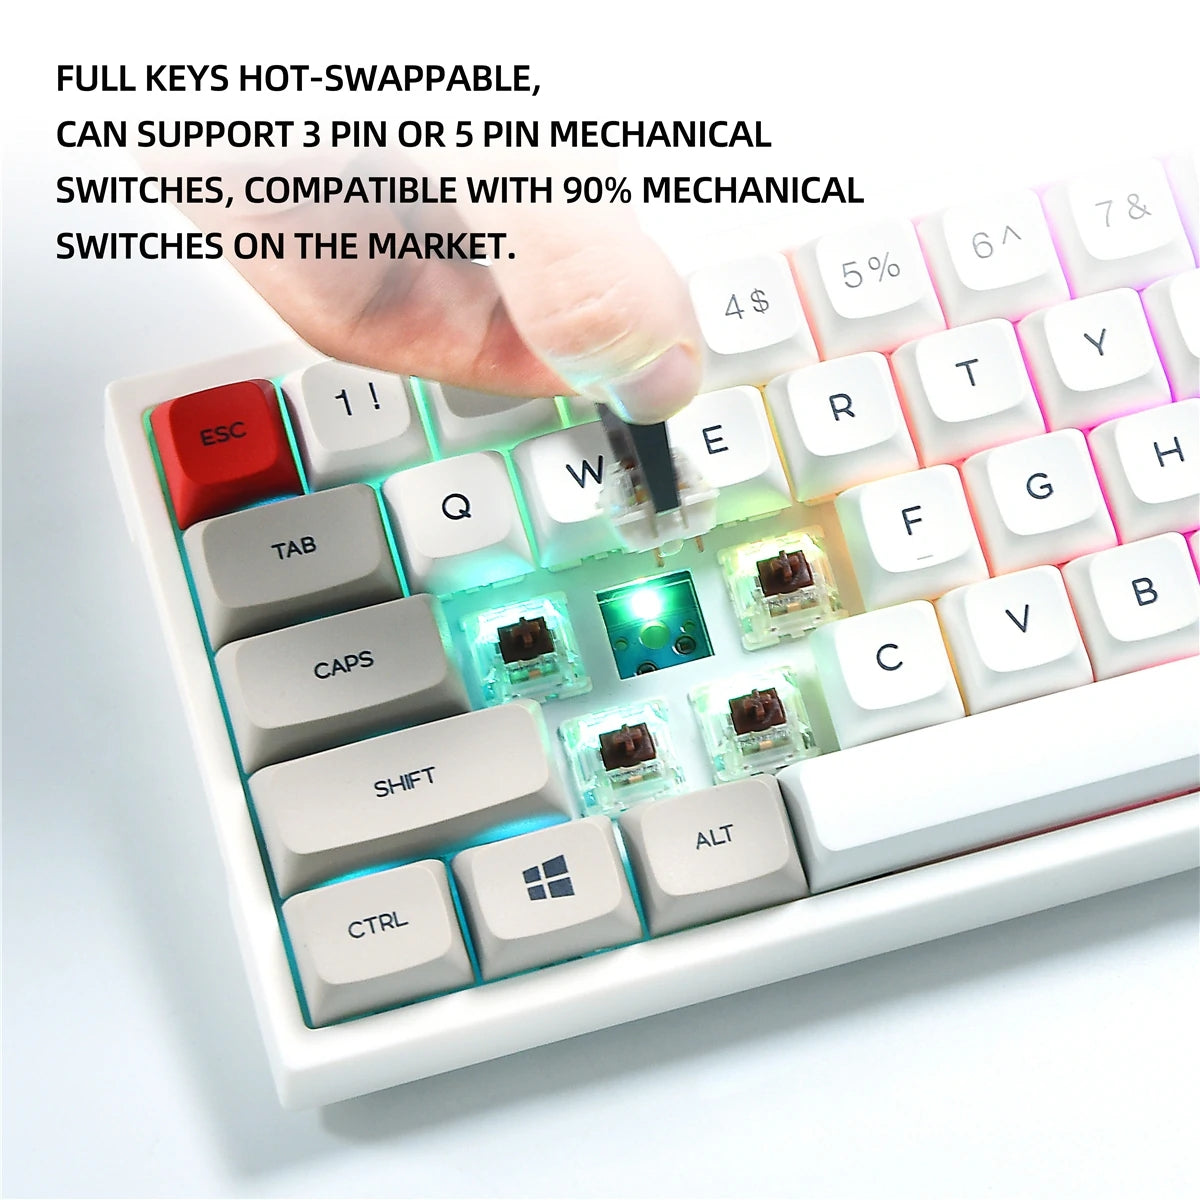 Customize your typing experience with hot-swappable keys that support 3-pin or 5-pin mechanical switches. The TK68 is compatible with 90% of mechanical switches on the market, making switch DIY a breeze.